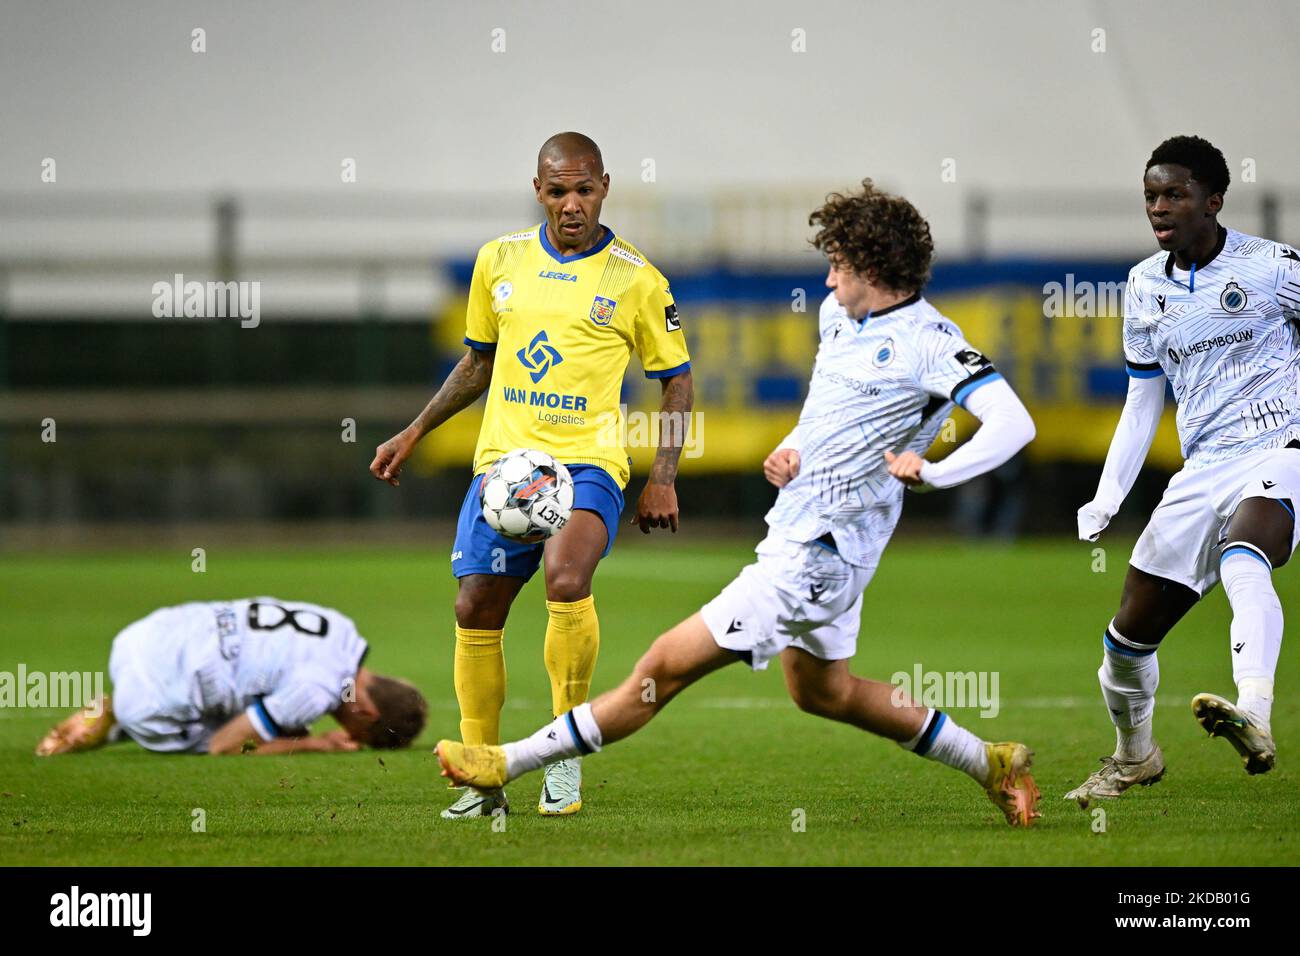 Beveren's Luiz Everton and Club NXT's Denzel De Roeve fight for the ball during a soccer match between SK Beveren and Club NXT, Saturday 05 November 2022 in Beveren-Waas, on day 12 of the 2022-2023 'Challenger Pro League' 1B second division of the Belgian championship. BELGA PHOTO FILIP LANSZWEERT Stock Photo